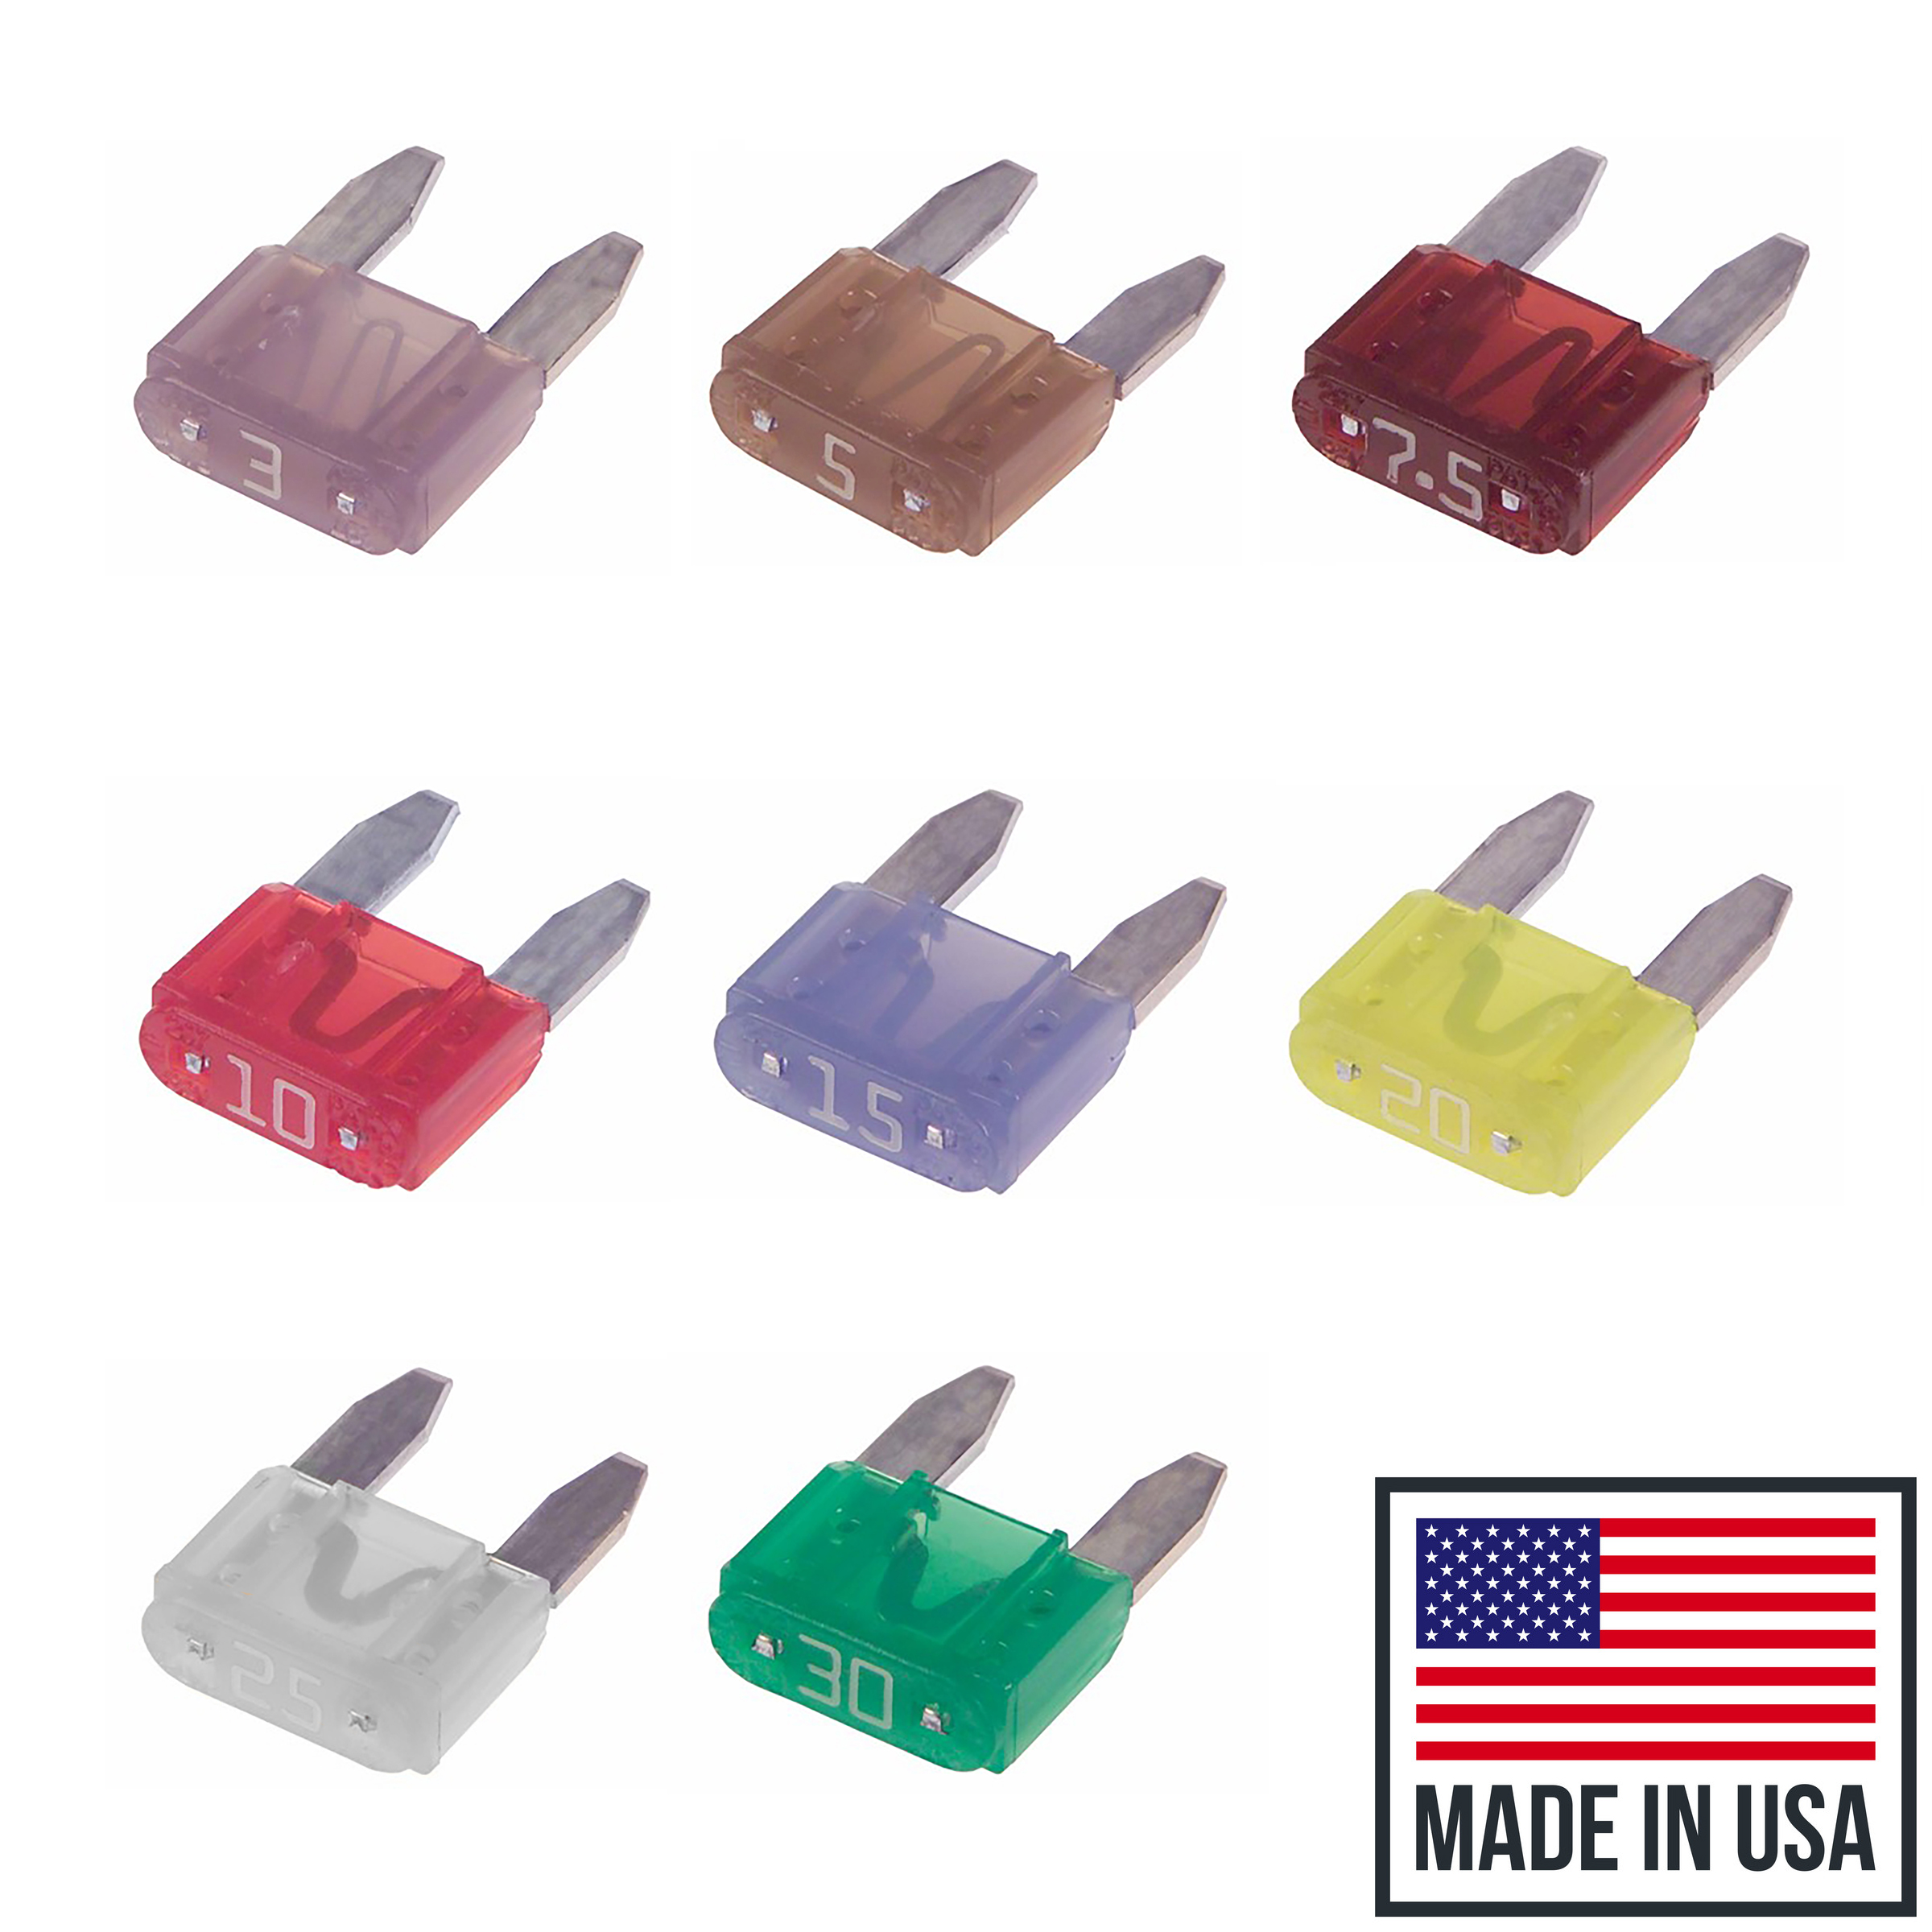 ATM Mini Fuses - Made in USA